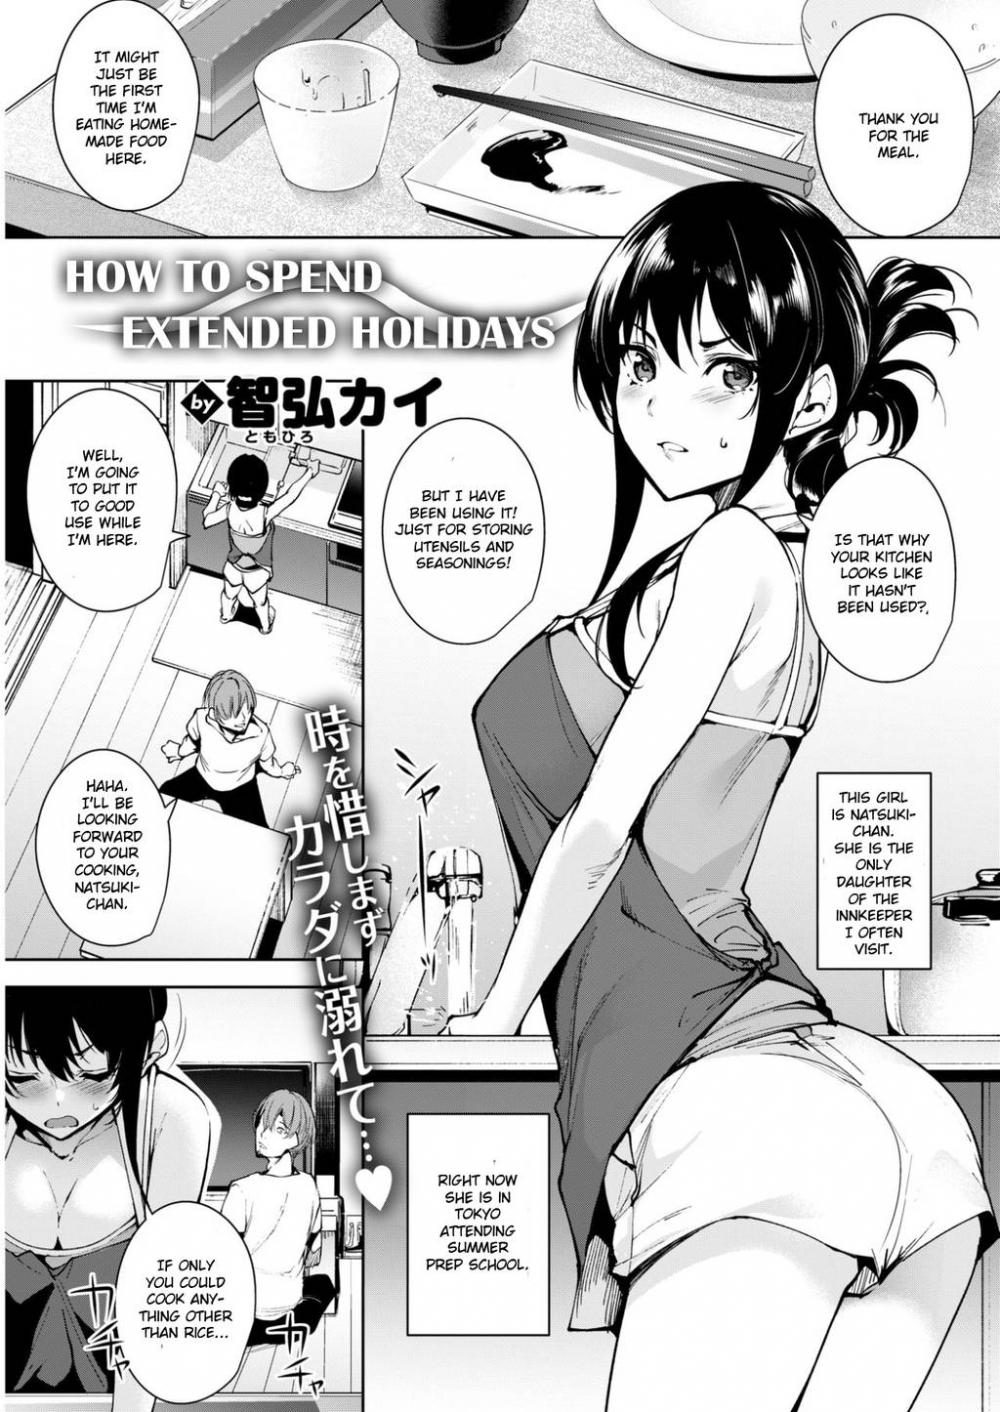 Hentai Manga Comic-How to Spend Extended Holidays-Read-1